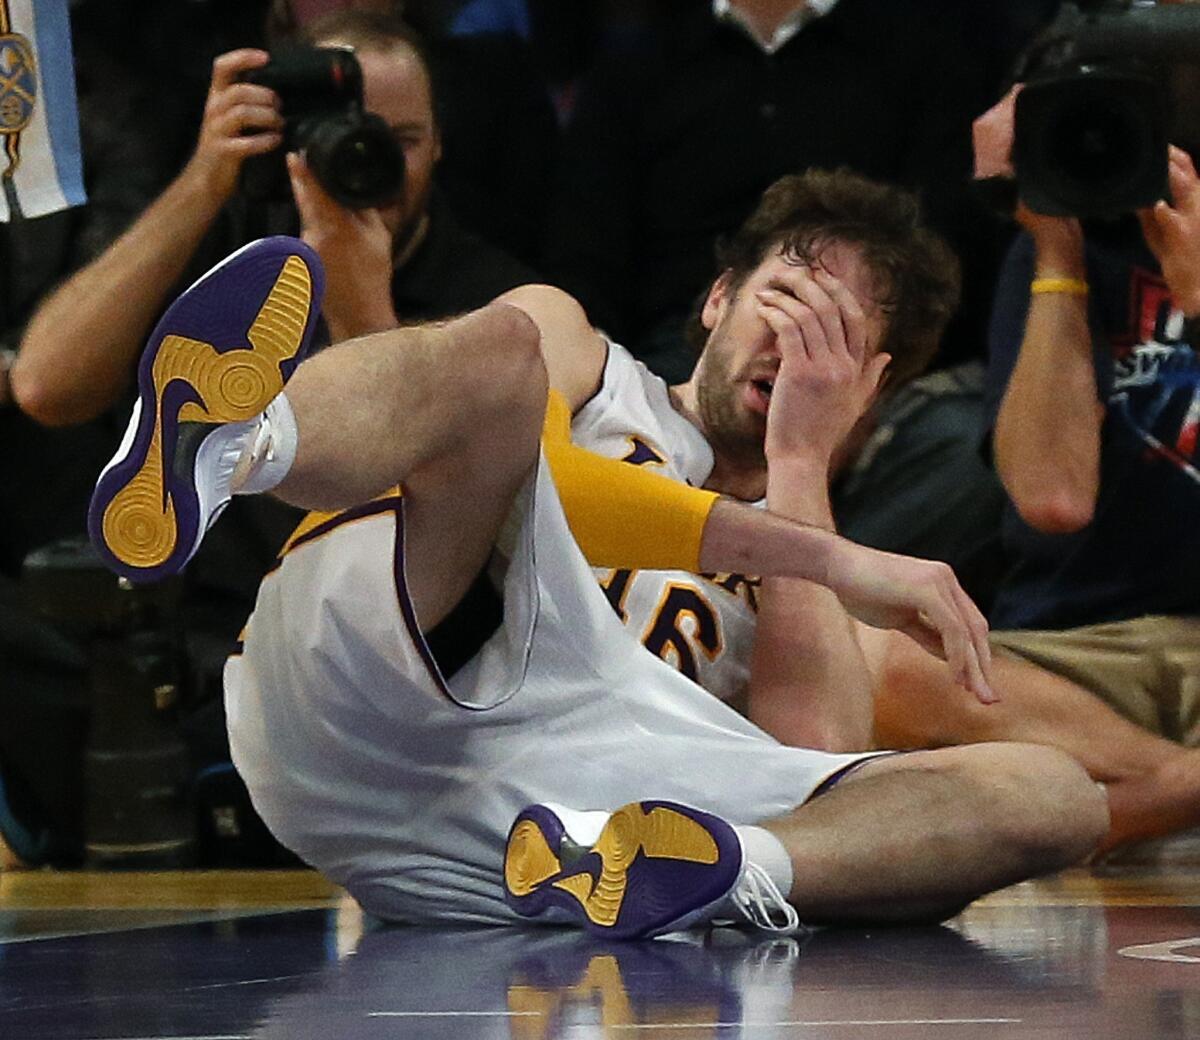 Pau Gasol falls to the floor after he is smacked in the nose by the Nuggets' JaVale McGee late in the fourth quarter of the Lakers' loss to Denver, 112-105.